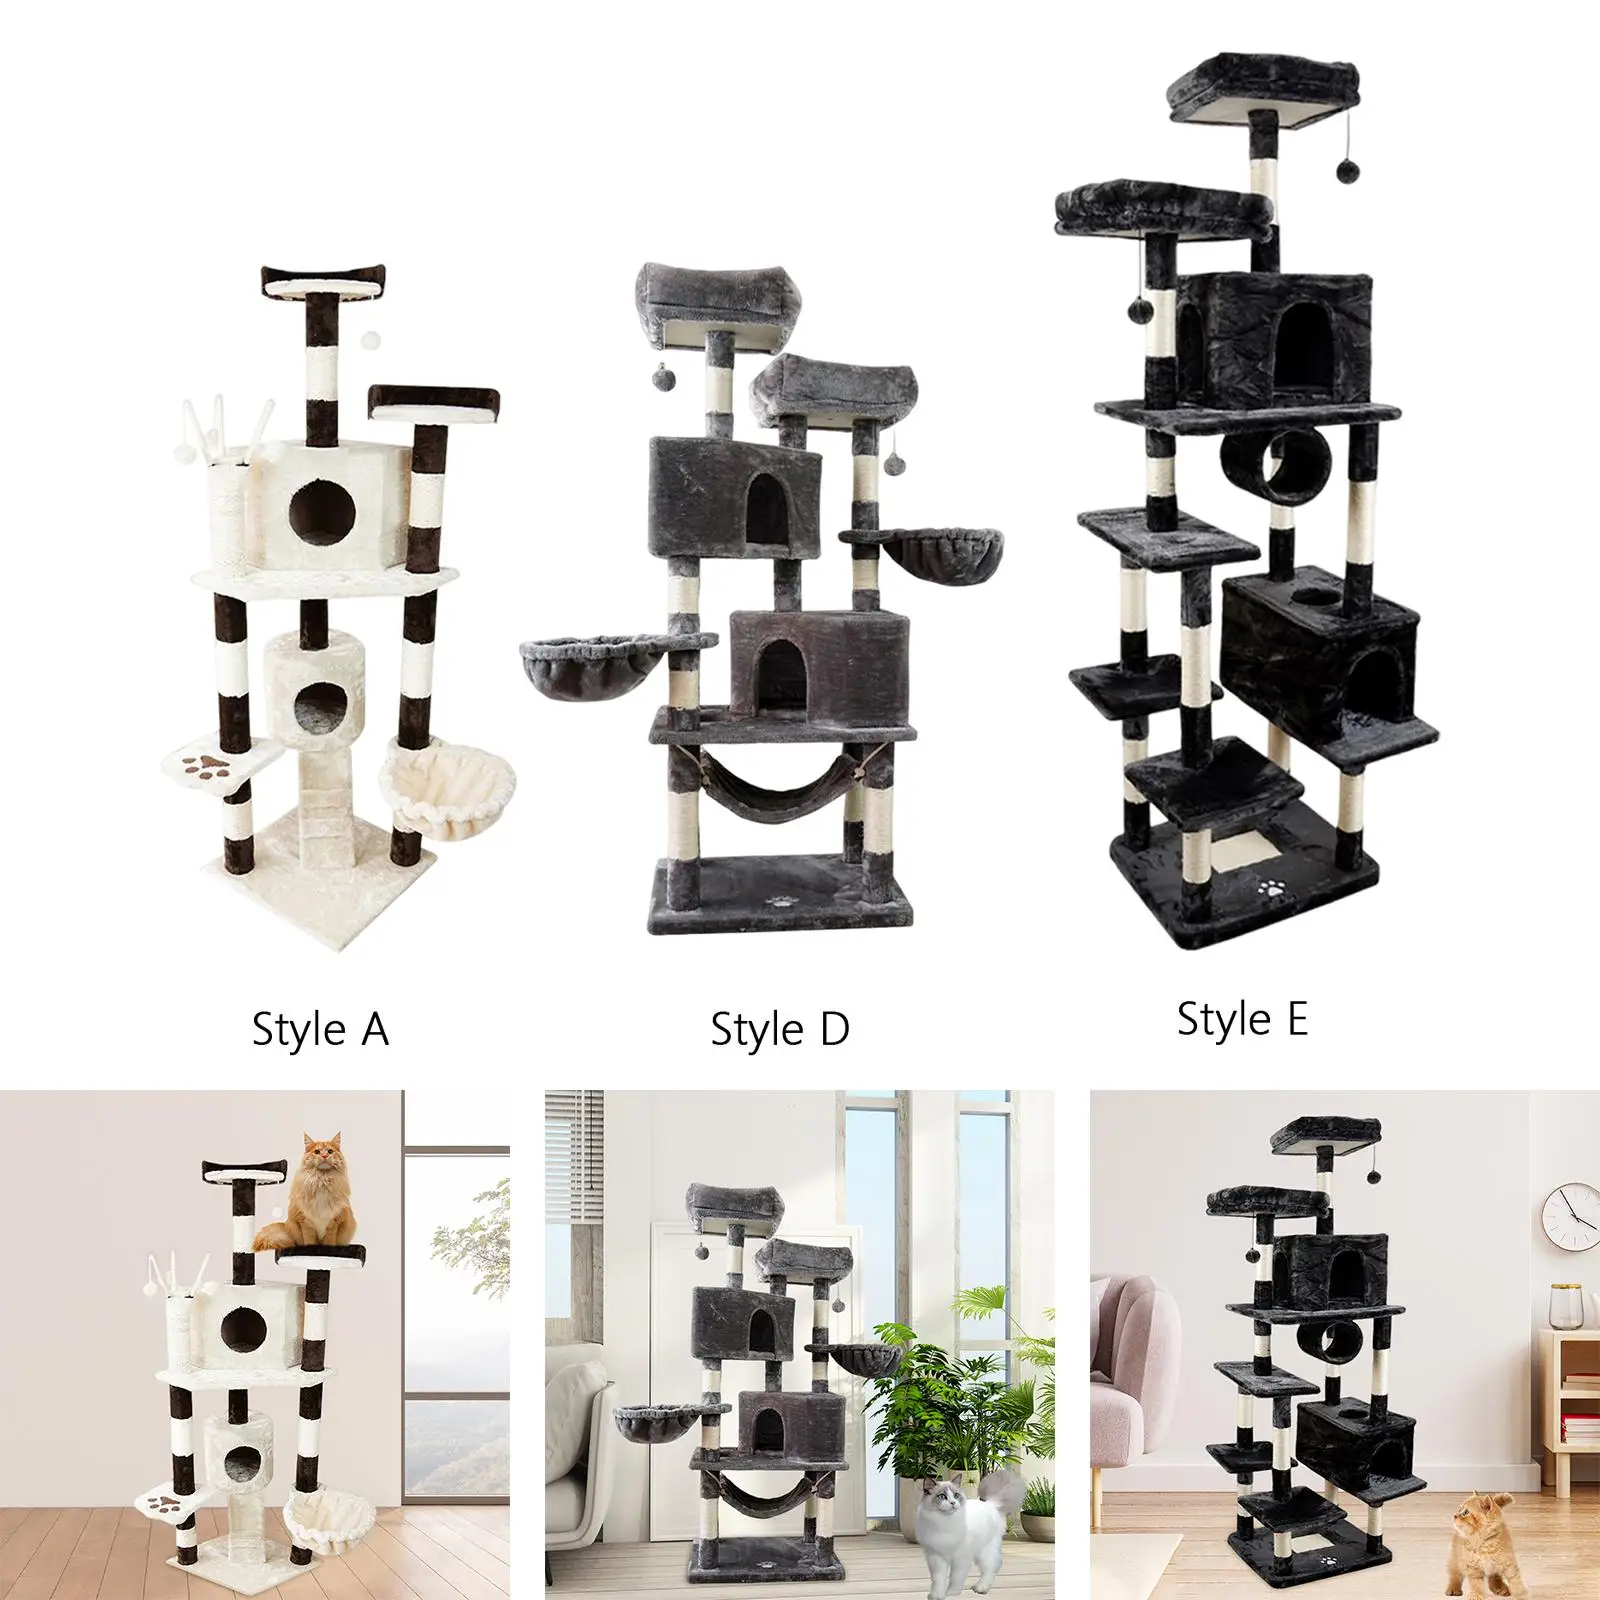 Tall Cat Scratcher Post Climbing Tree Hanging Toys Furniture Protector Animal Climbing Frame Scratching Toy for Indoor Cats Rest